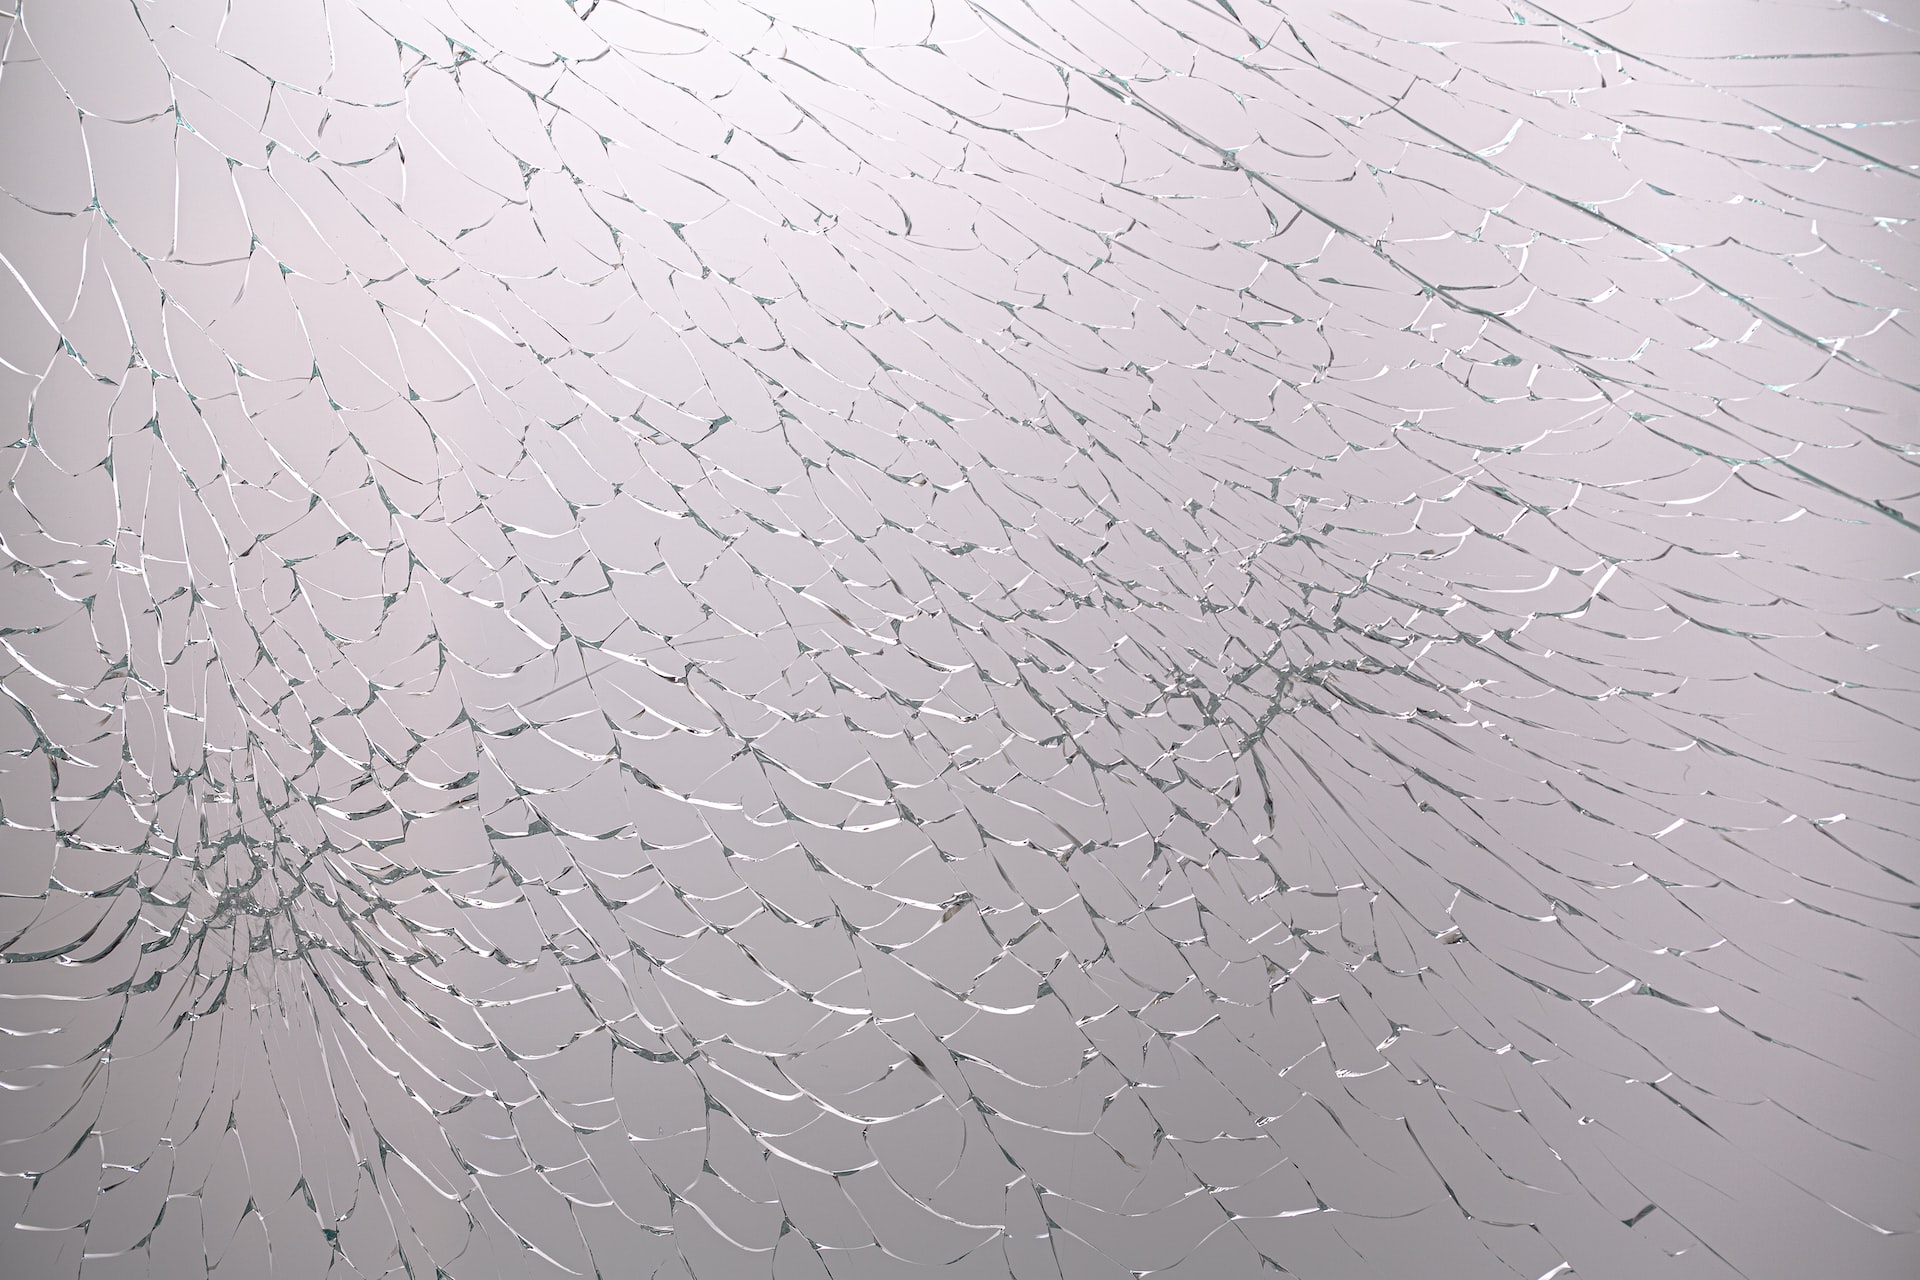 Broken Glass illustrating the need for security window film